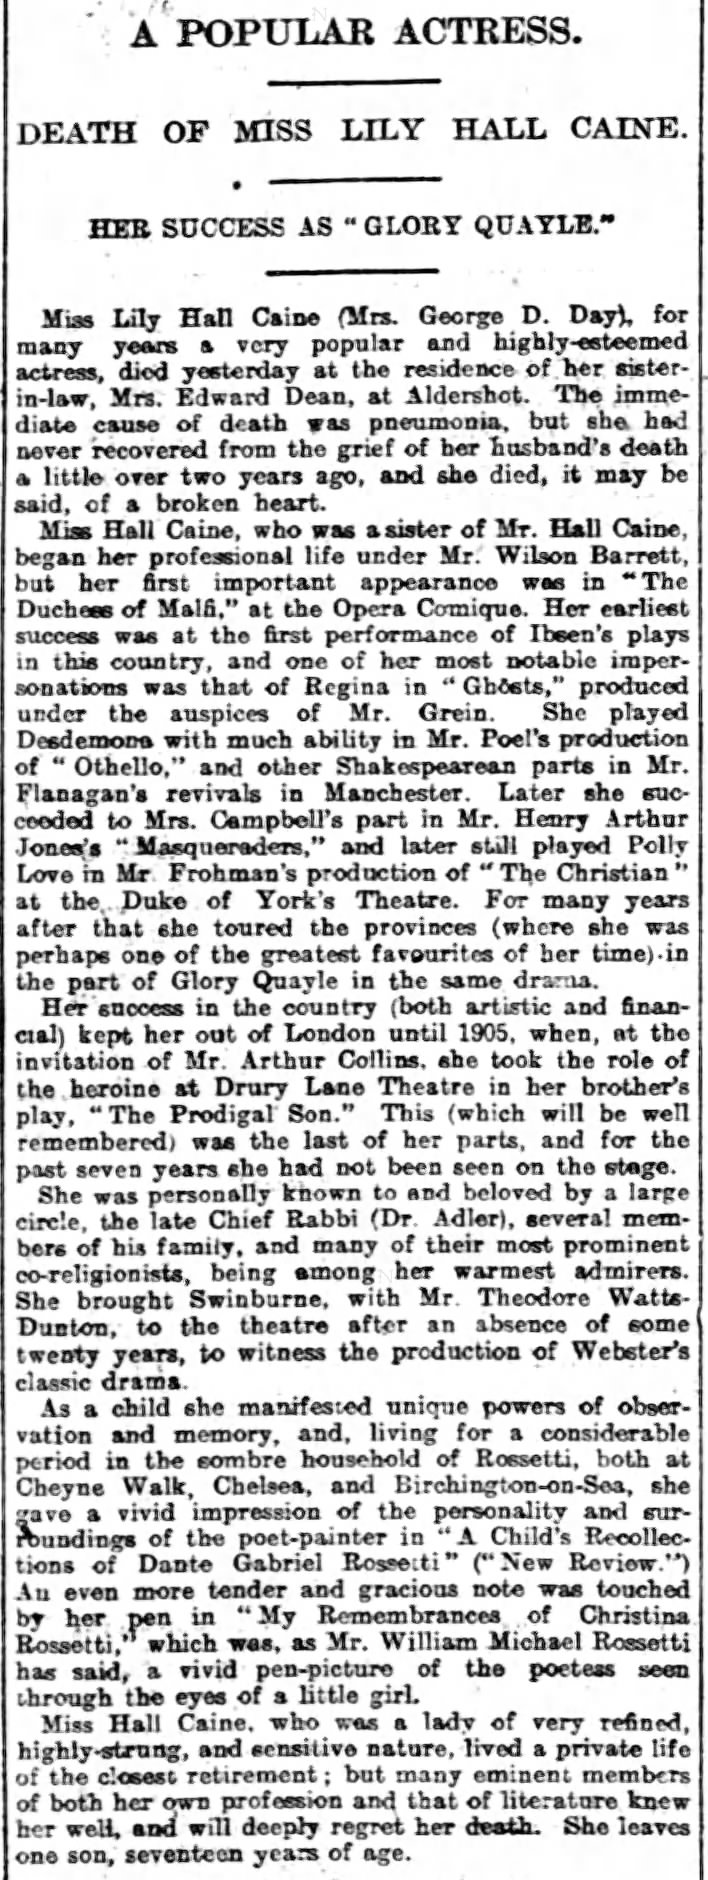 A Popular Actress: Death of Miss Lily Hall Caine